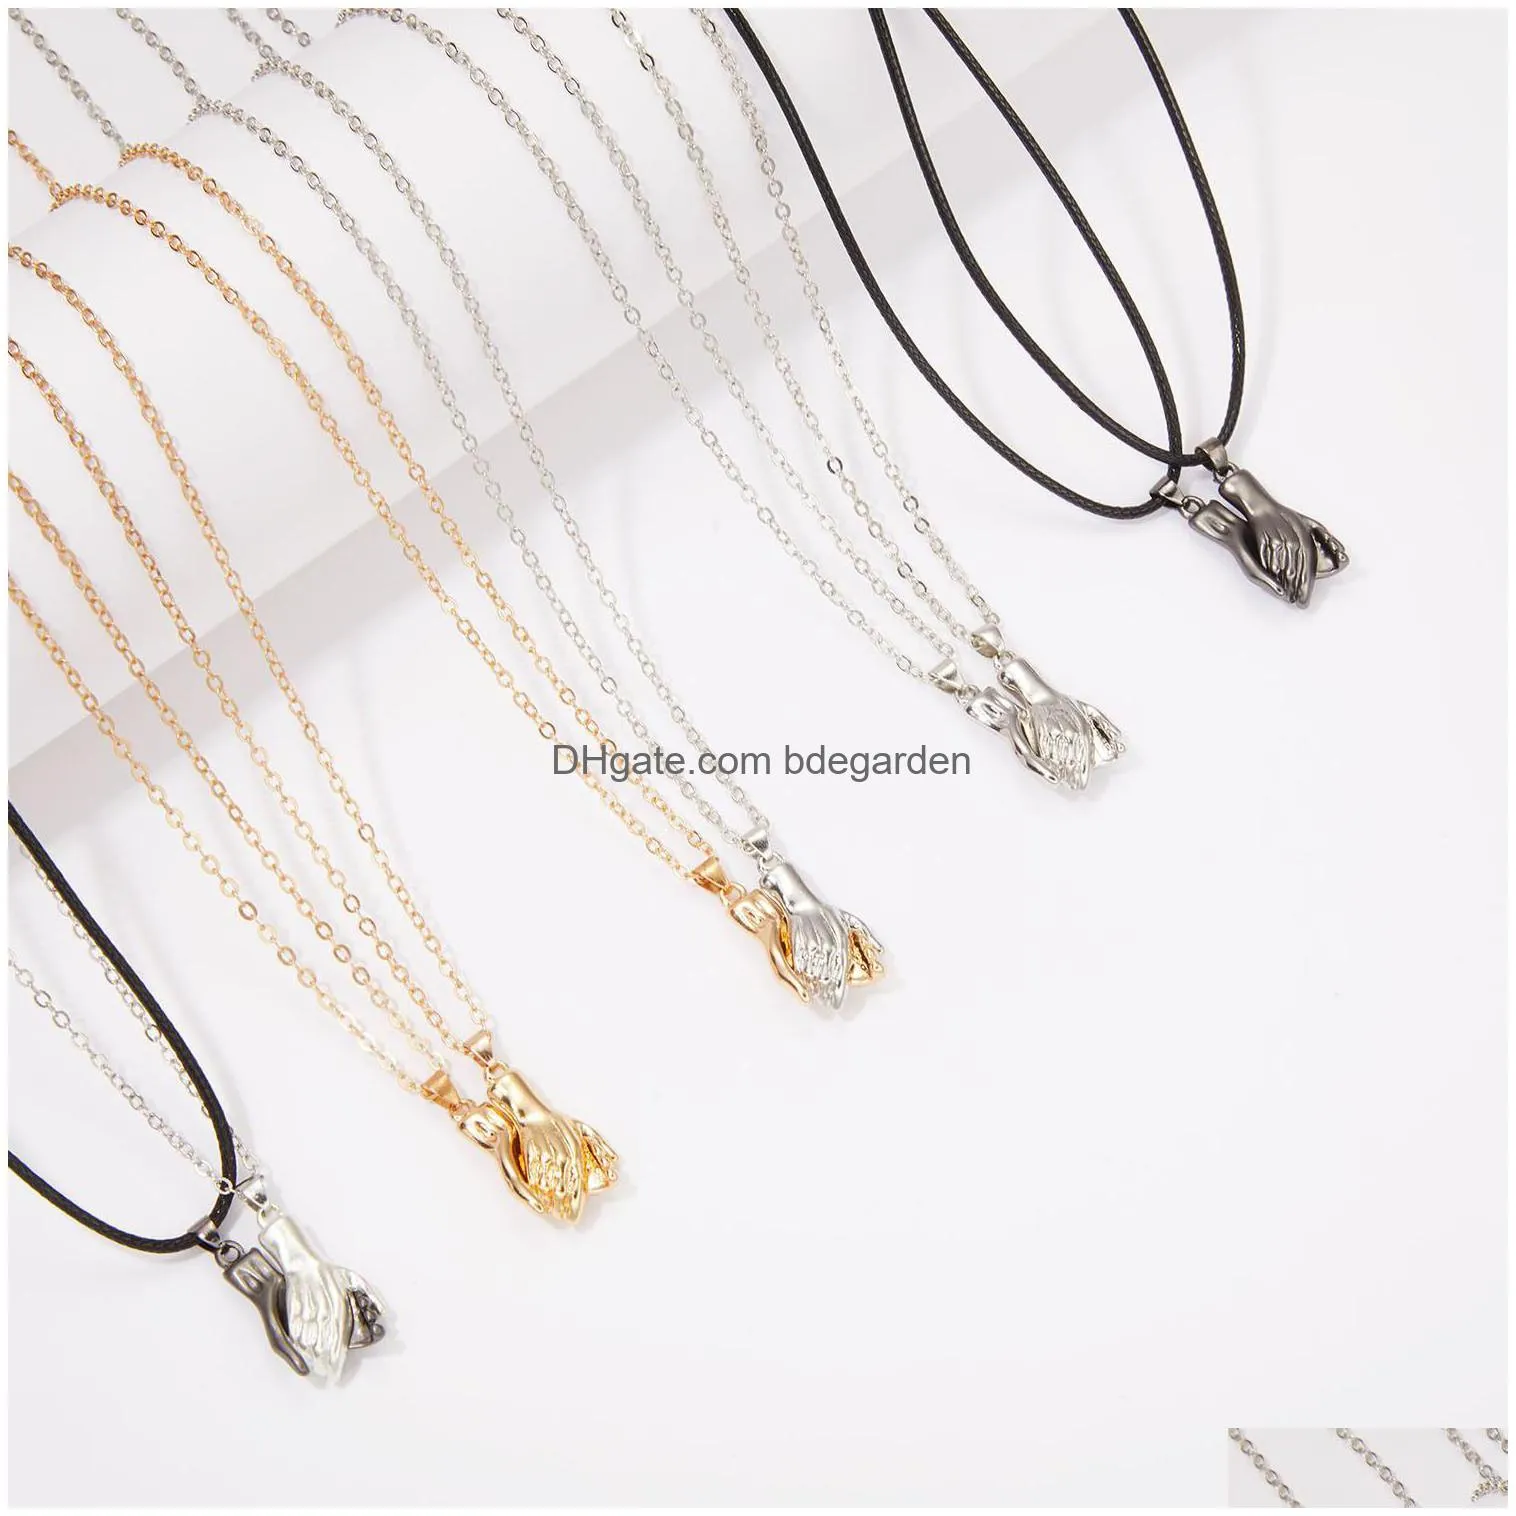 2pcs/lot magnetic hand in hand pendant necklace matching necklaces jewelry for couple friendship valentines day gifts